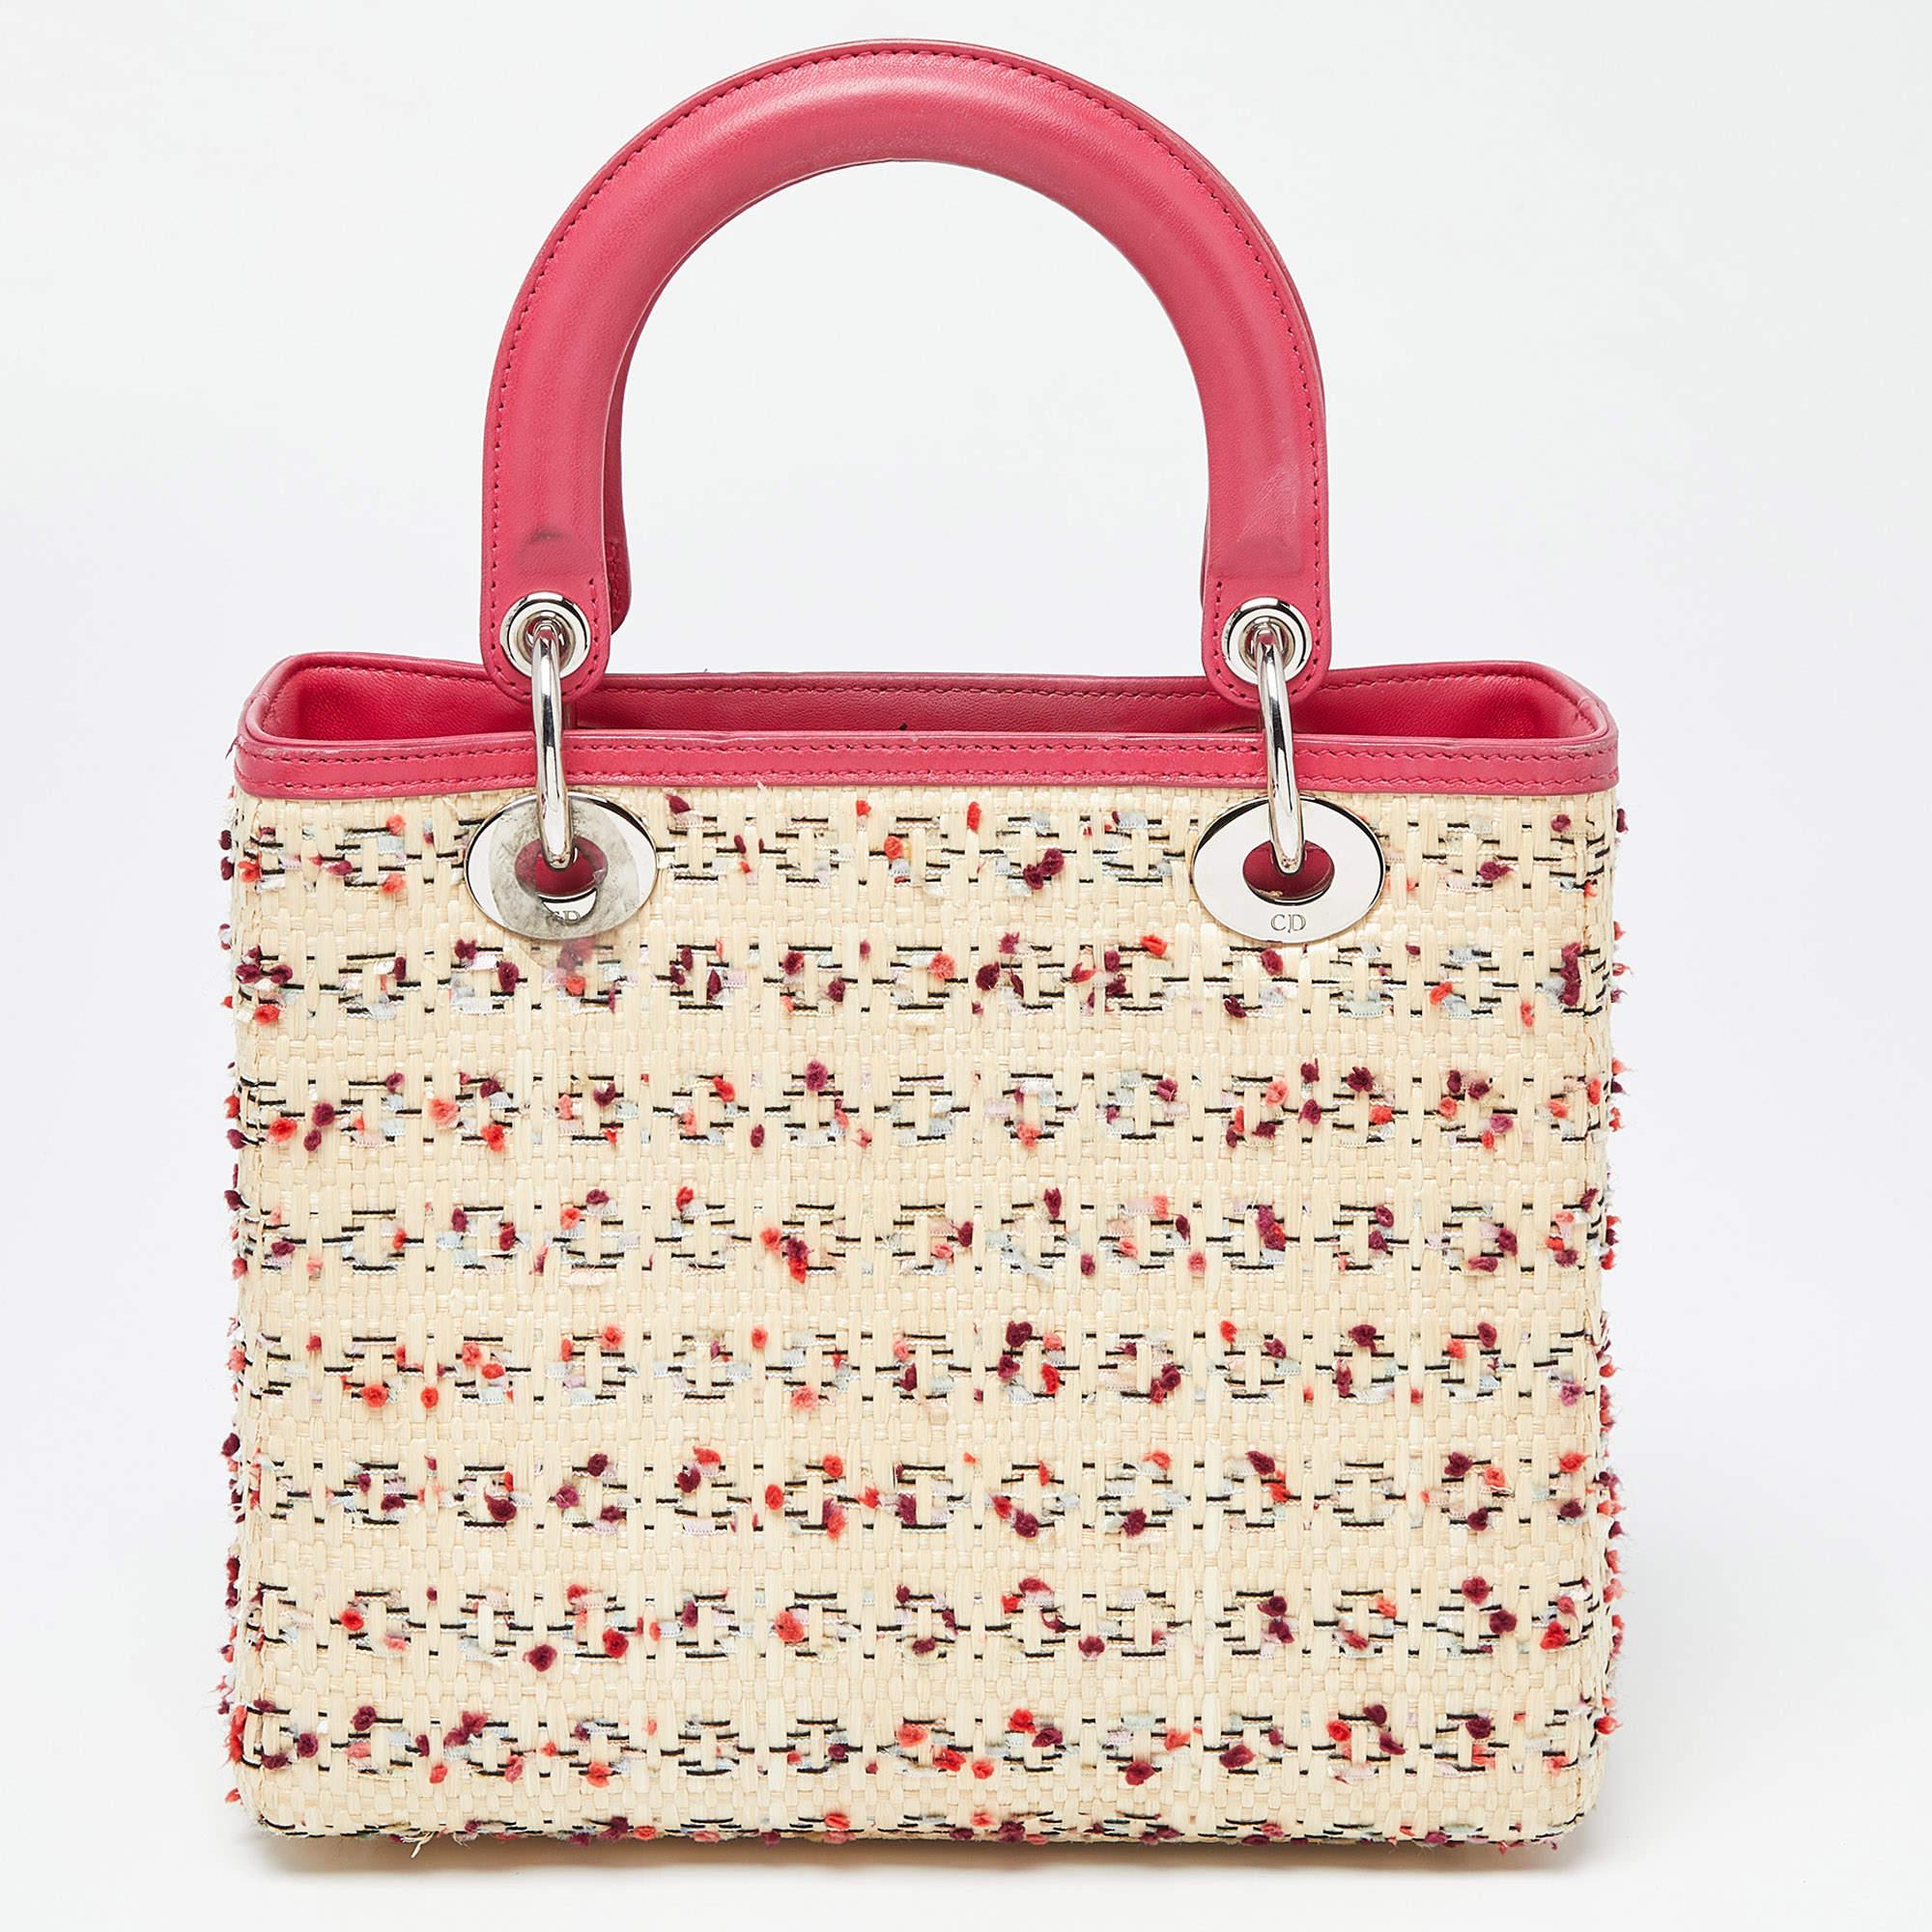 A classic handbag comes with the promise of enduring appeal, boosting your style time and again. This Lady Dior tote is one such creation. It’s a fine purchase.

Includes: Detachable Strap